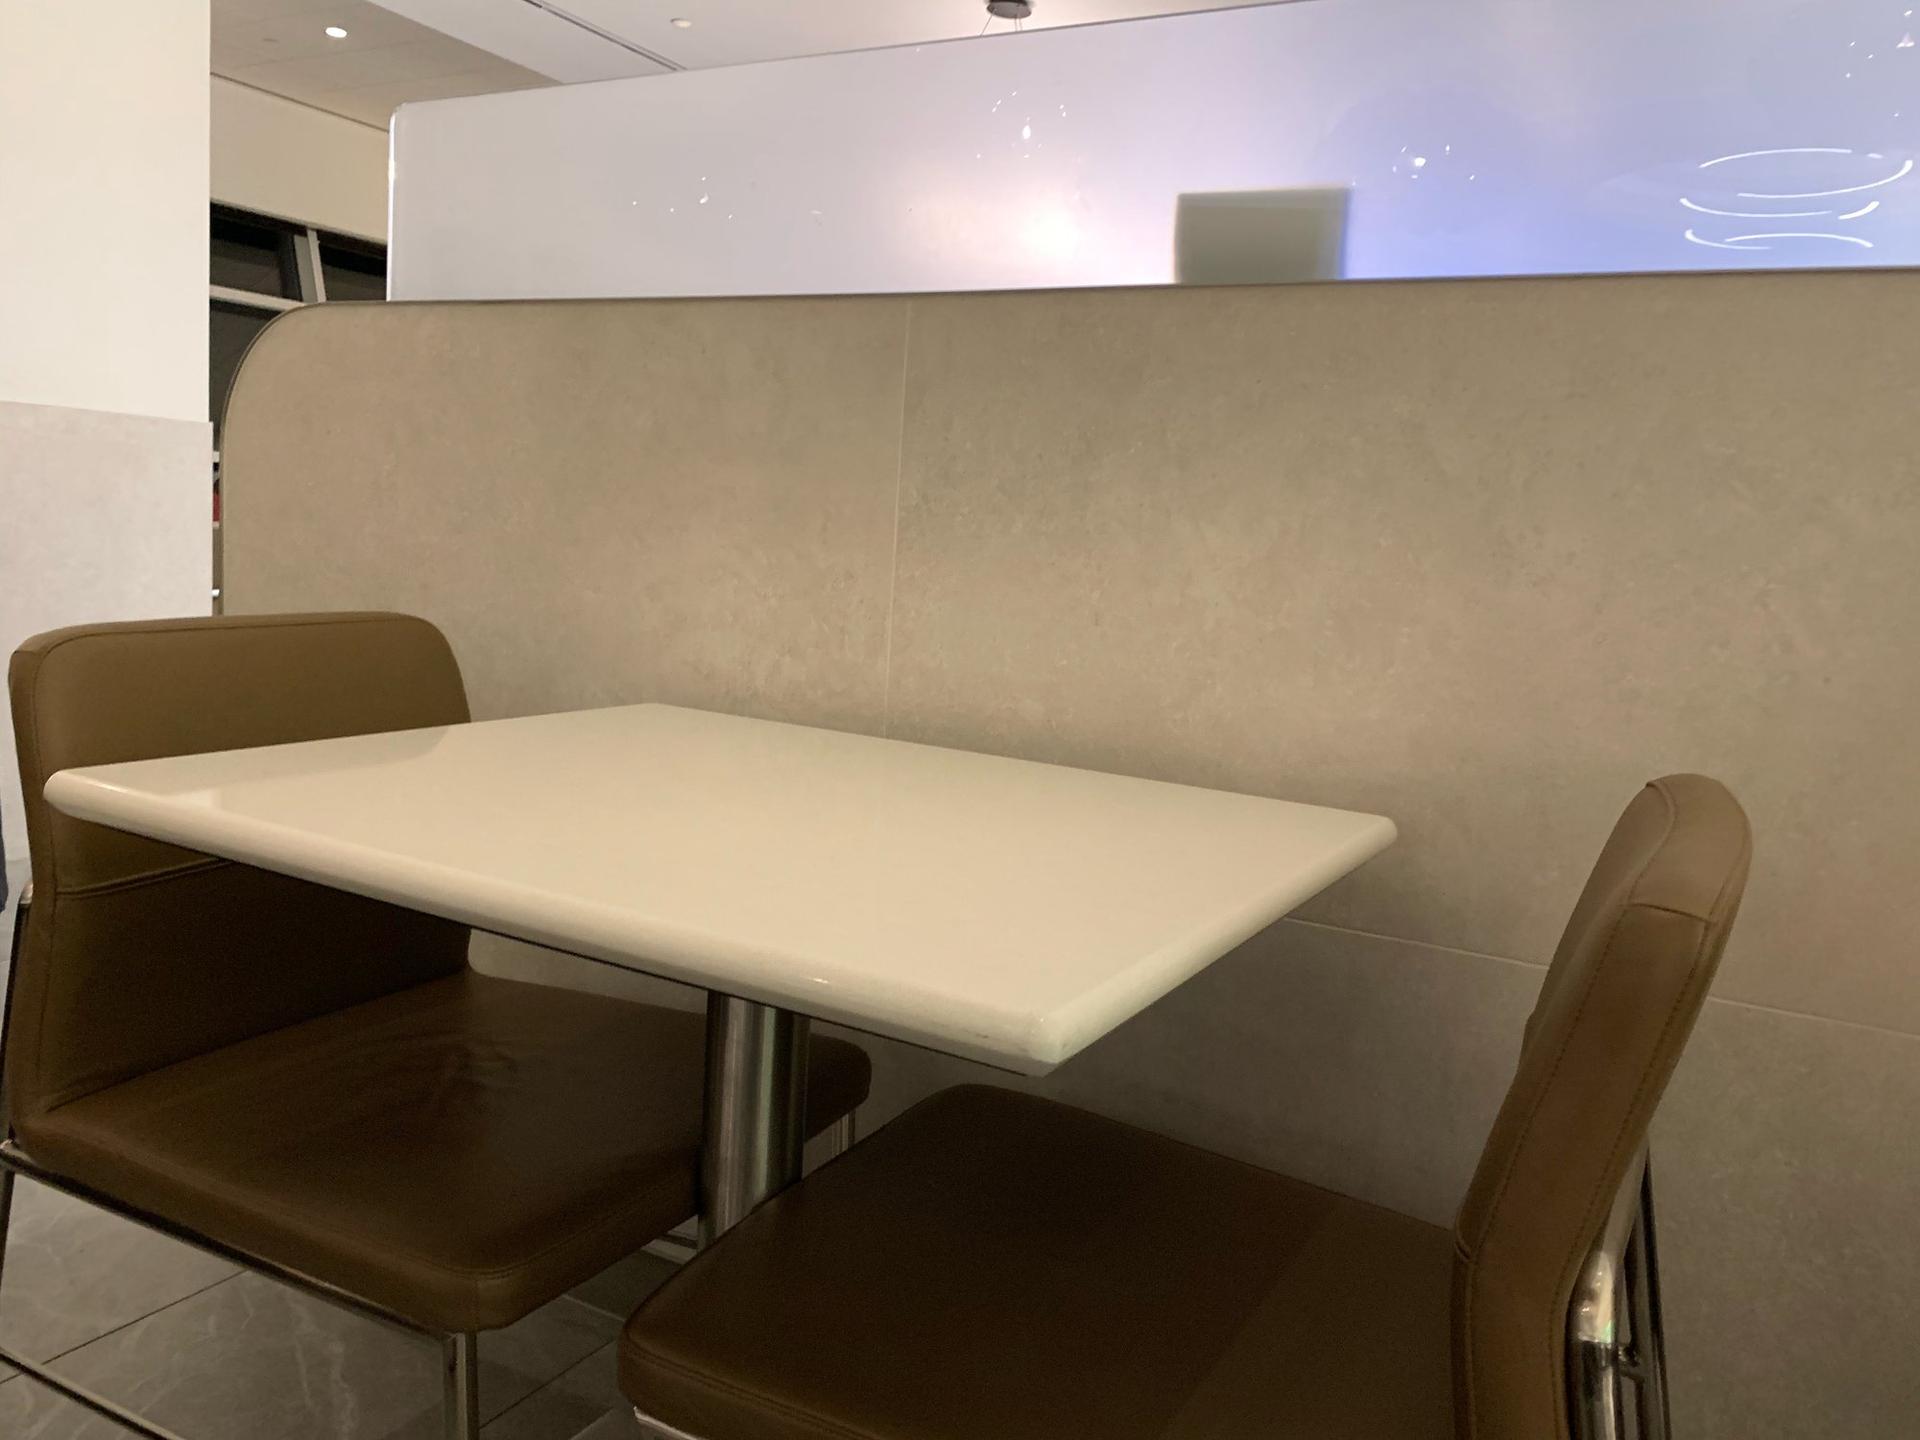 American Airlines Flagship Lounge image 9 of 55